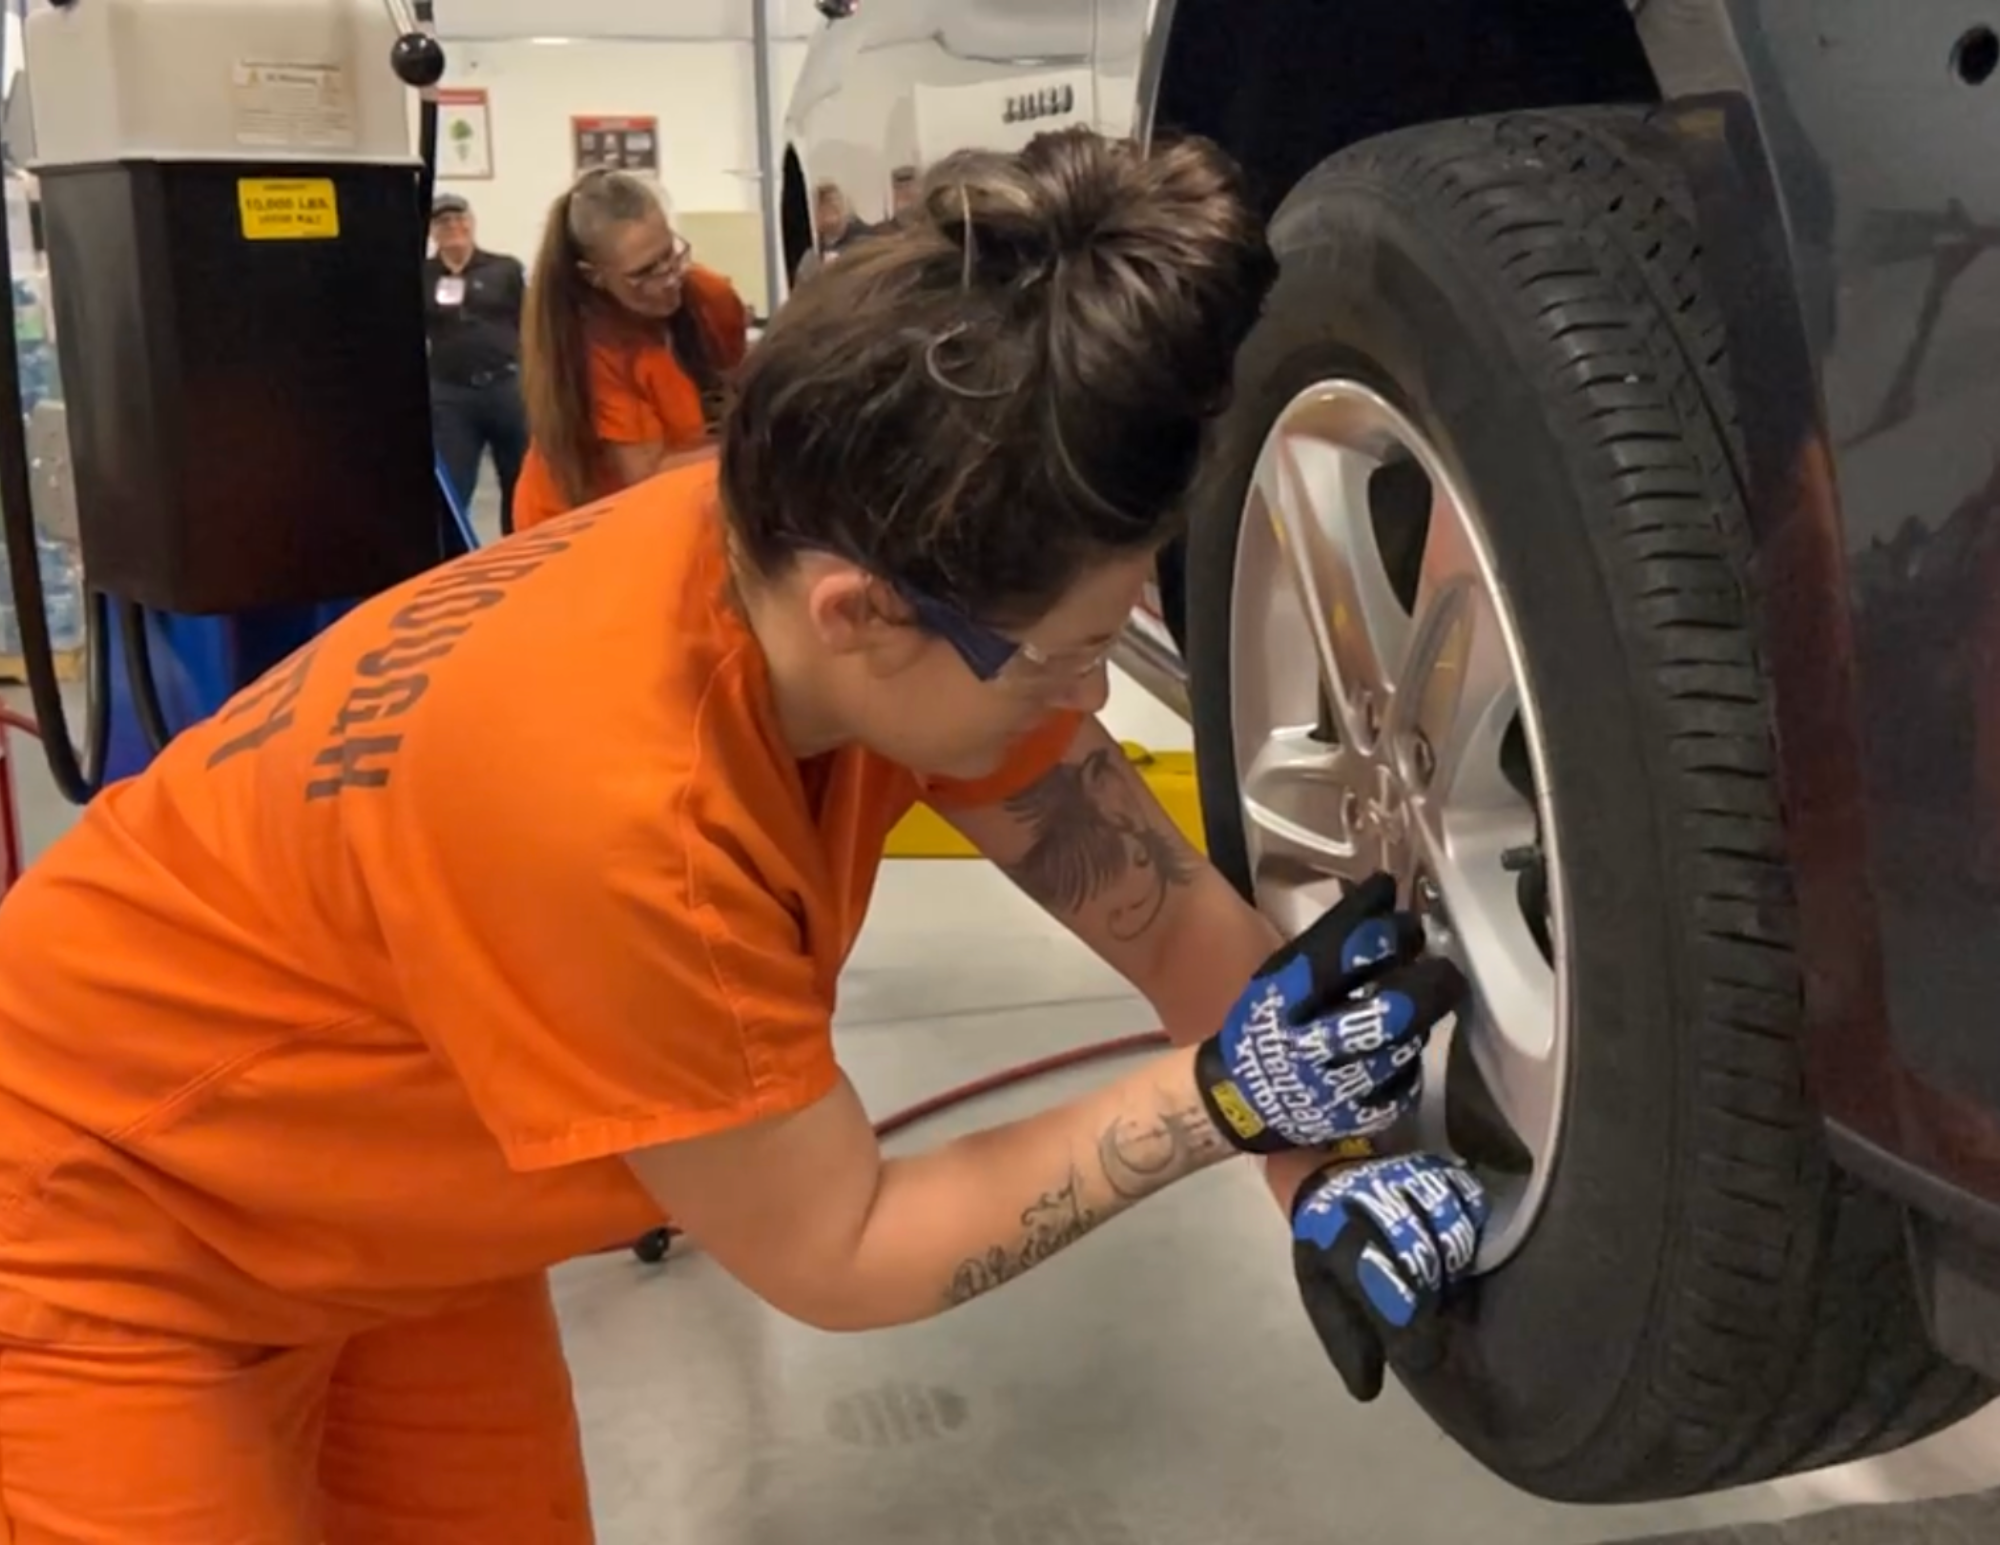 FIRST CLASS OF FEMALE INMATES GRADUATING WITH AUTOMOTIVE CERTIFICATION